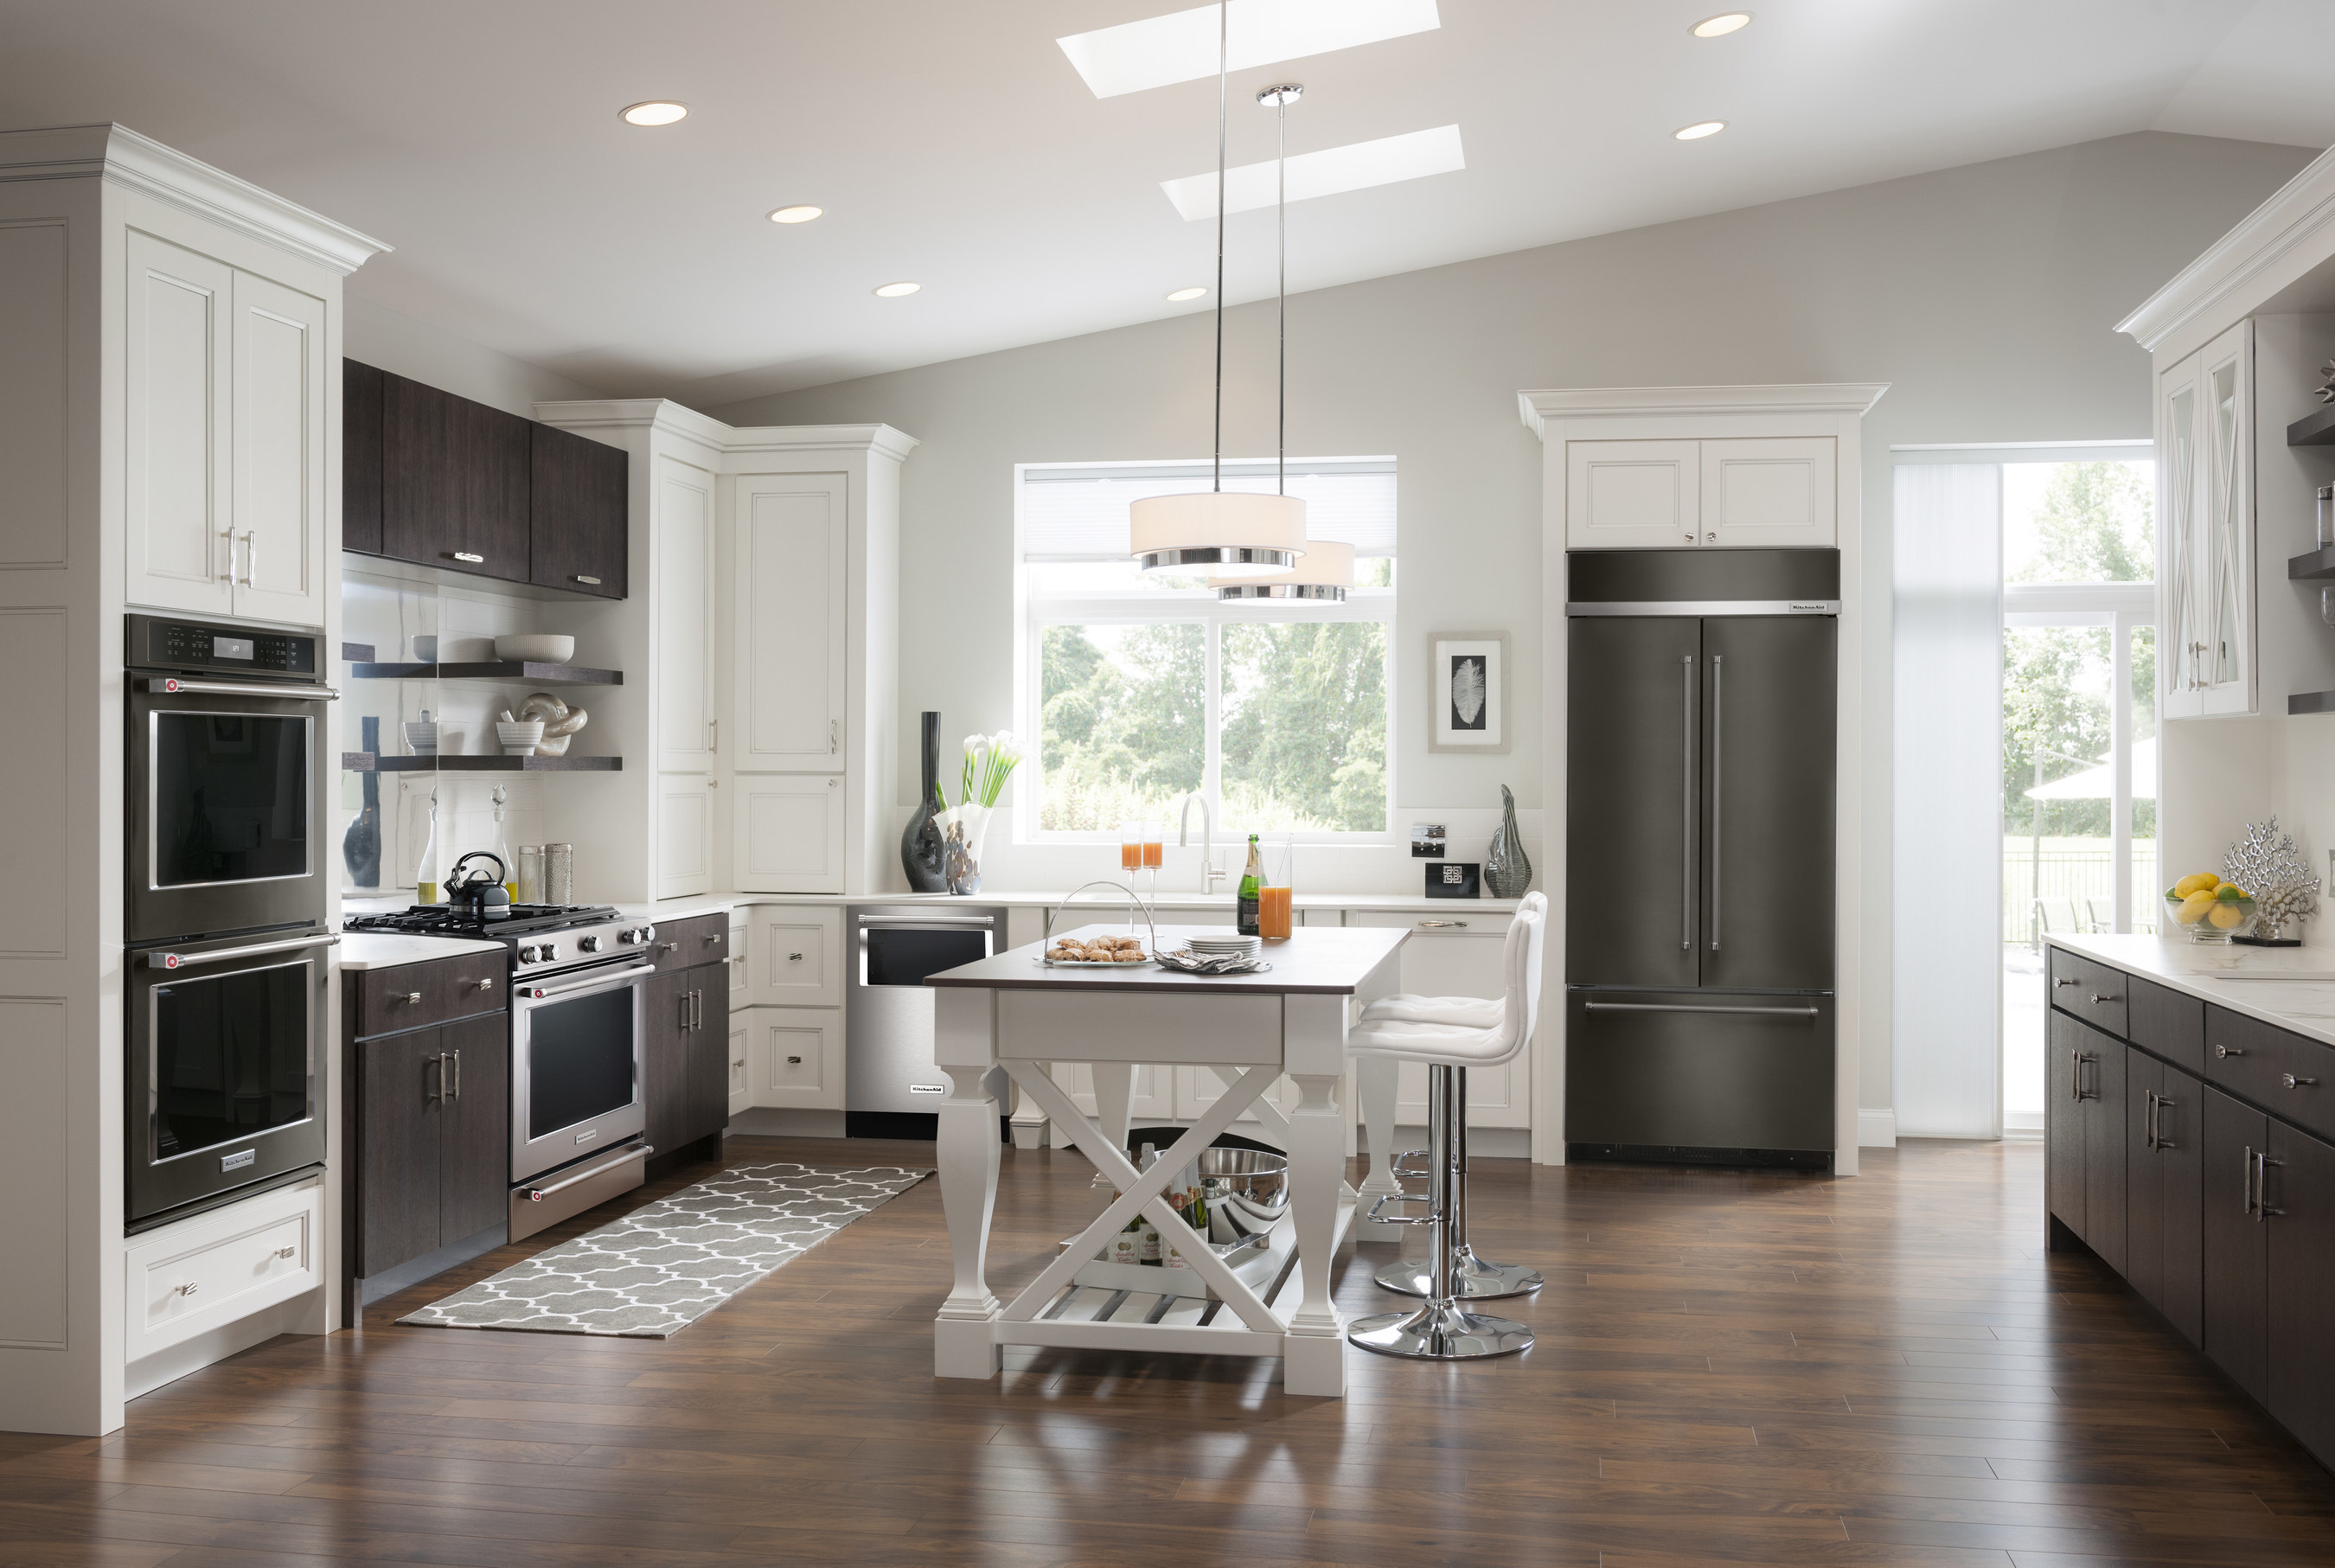 Ready For A Kitchen Revamp? New Black Stainless Steel And Traditional  Finishes From KitchenAid Offer Endless Design Possibilities